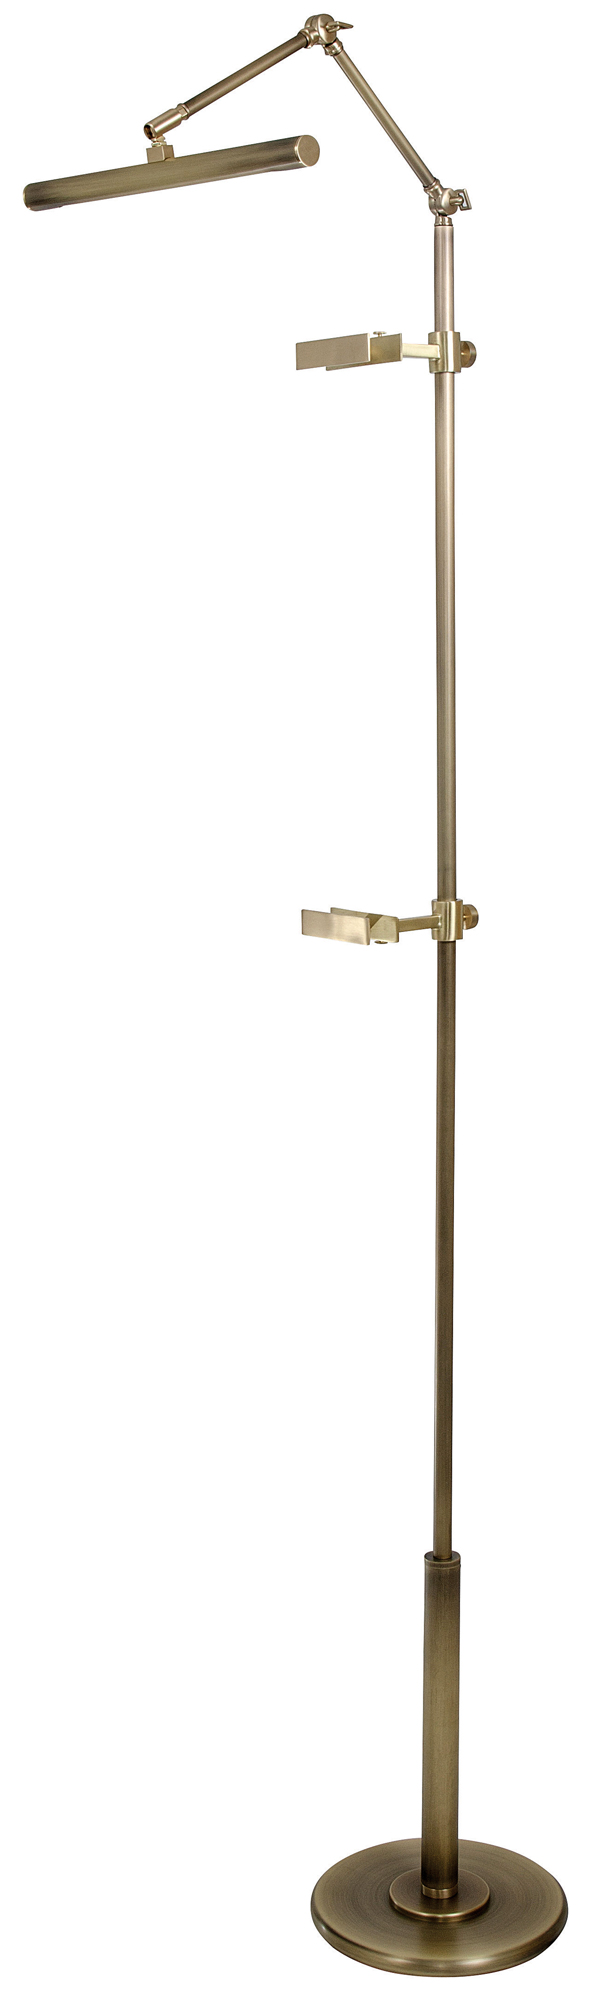 River North Adjustable Picture Easel Floor Lamp by House Of Troy, RN300-AB/SB